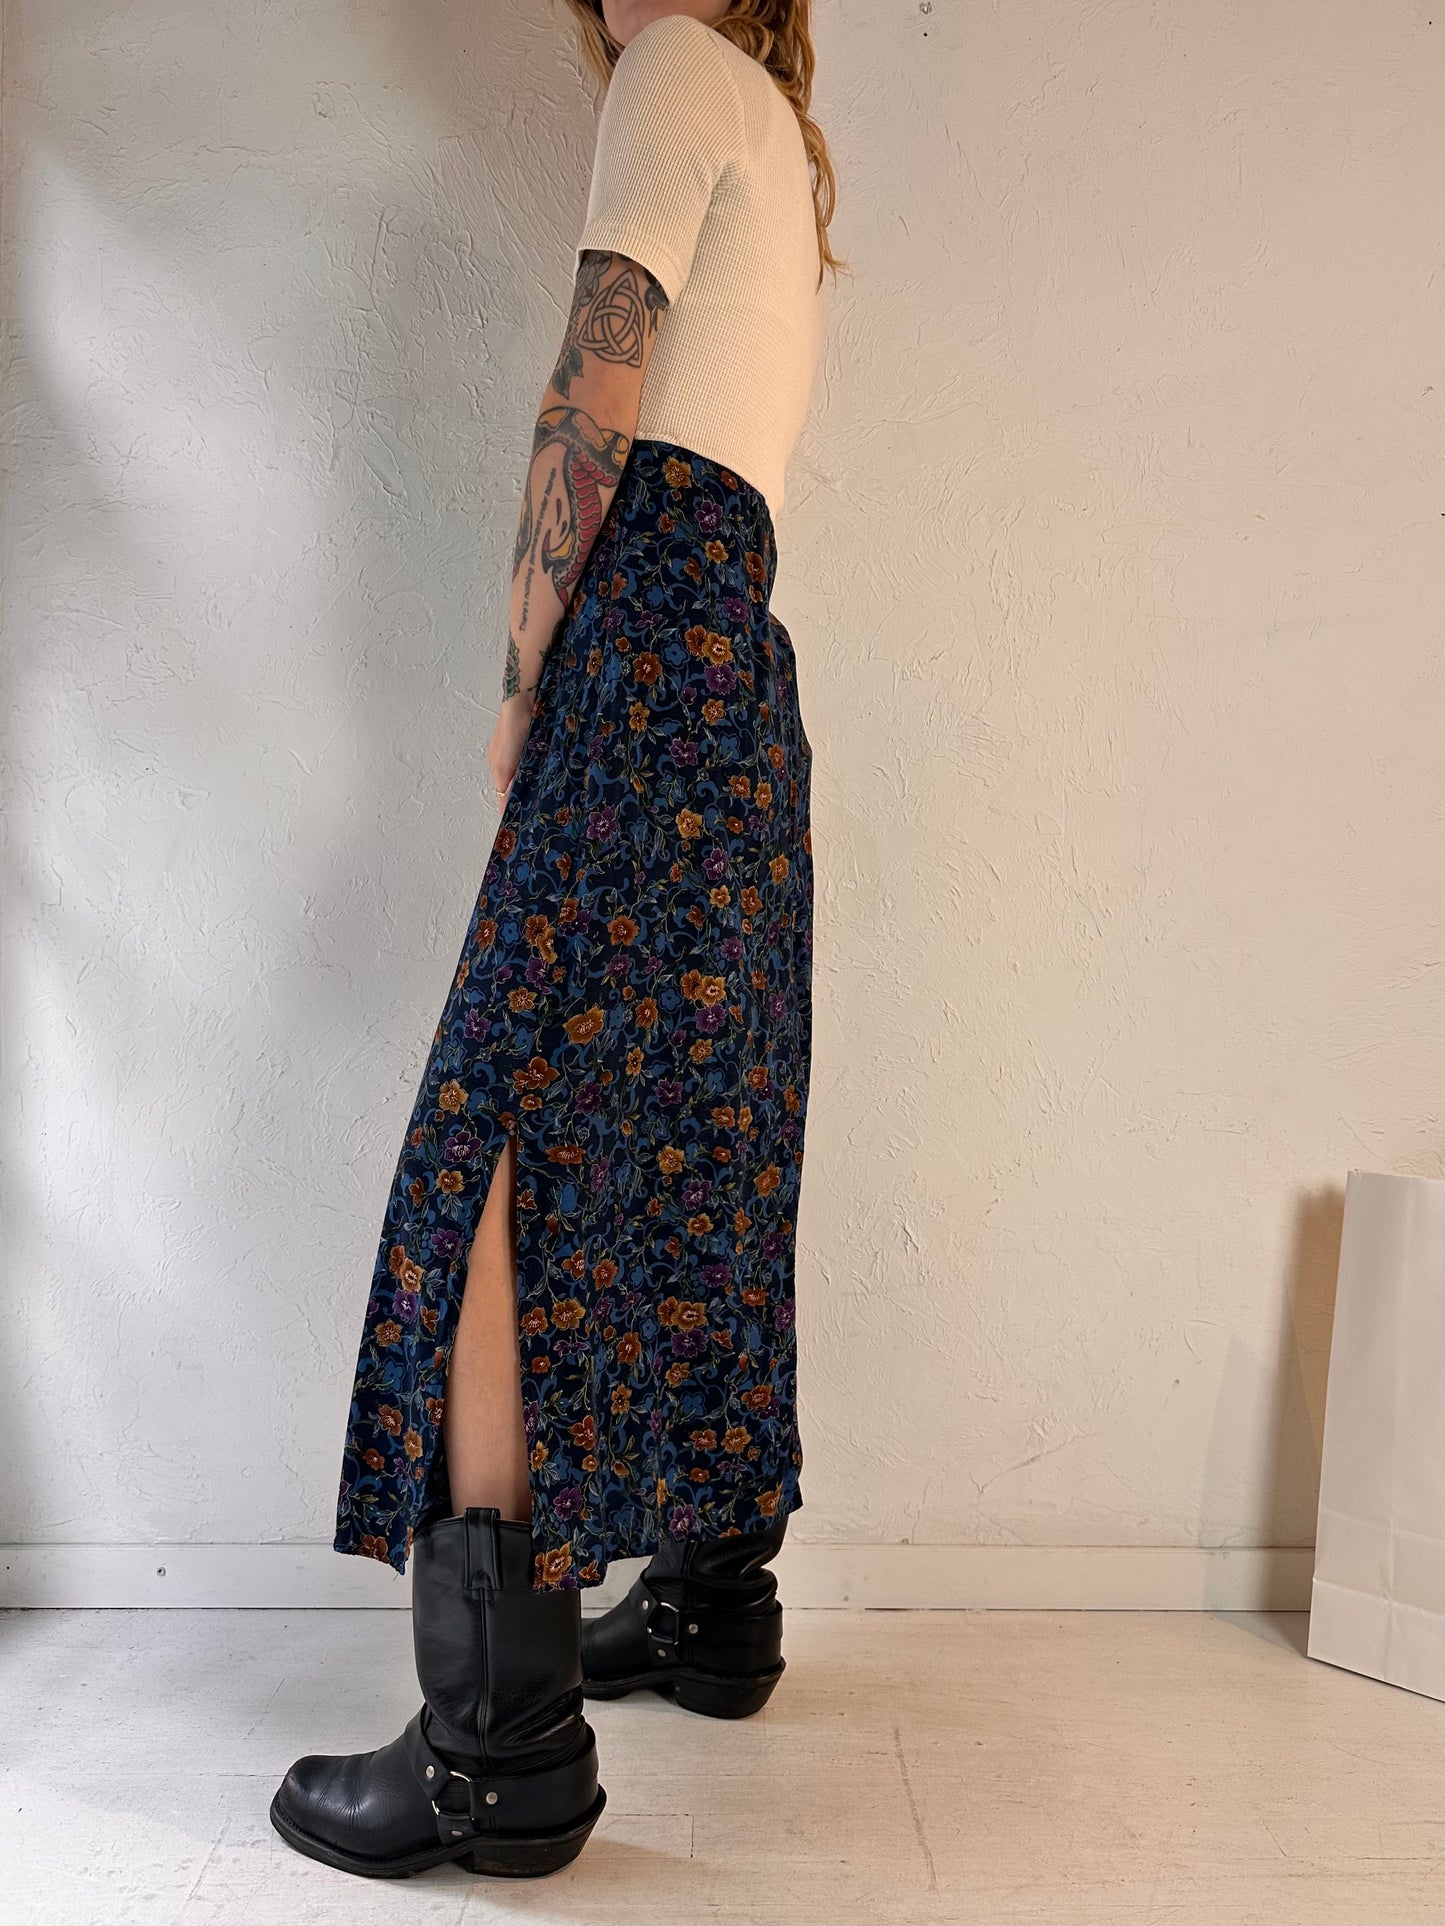 90s 'Studio Ease' Floral Dress / Small